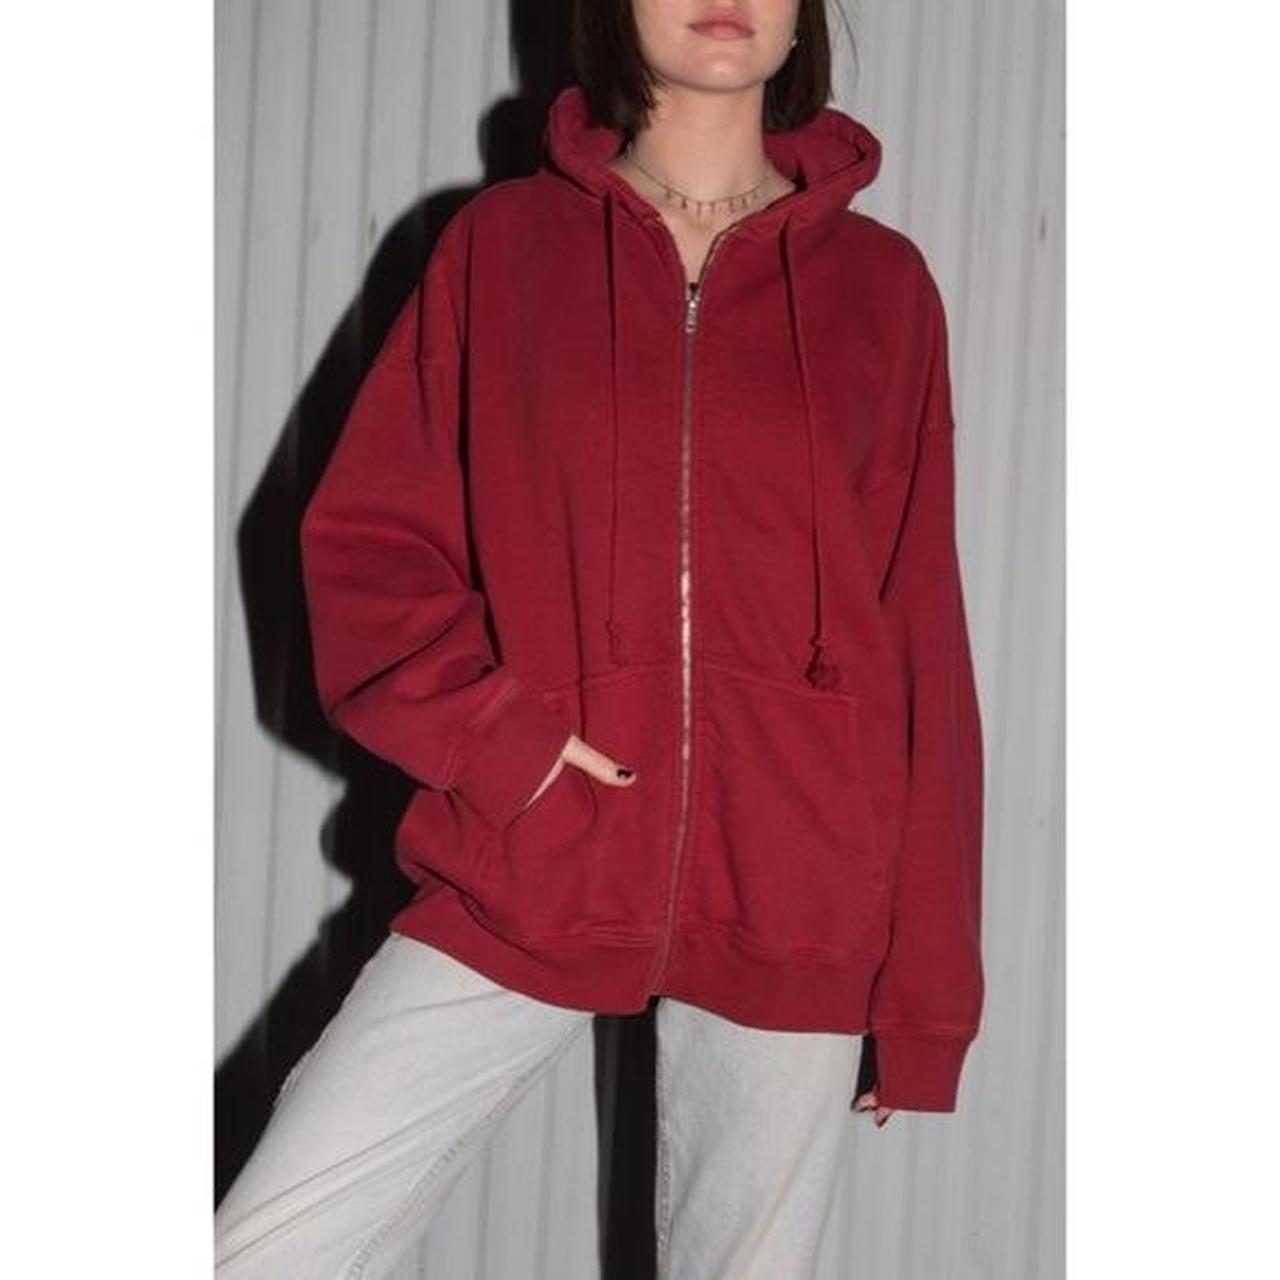 Brandy Melville Women's Hoodie Red Maroon Long Sleeve ONE SIZE Pullover